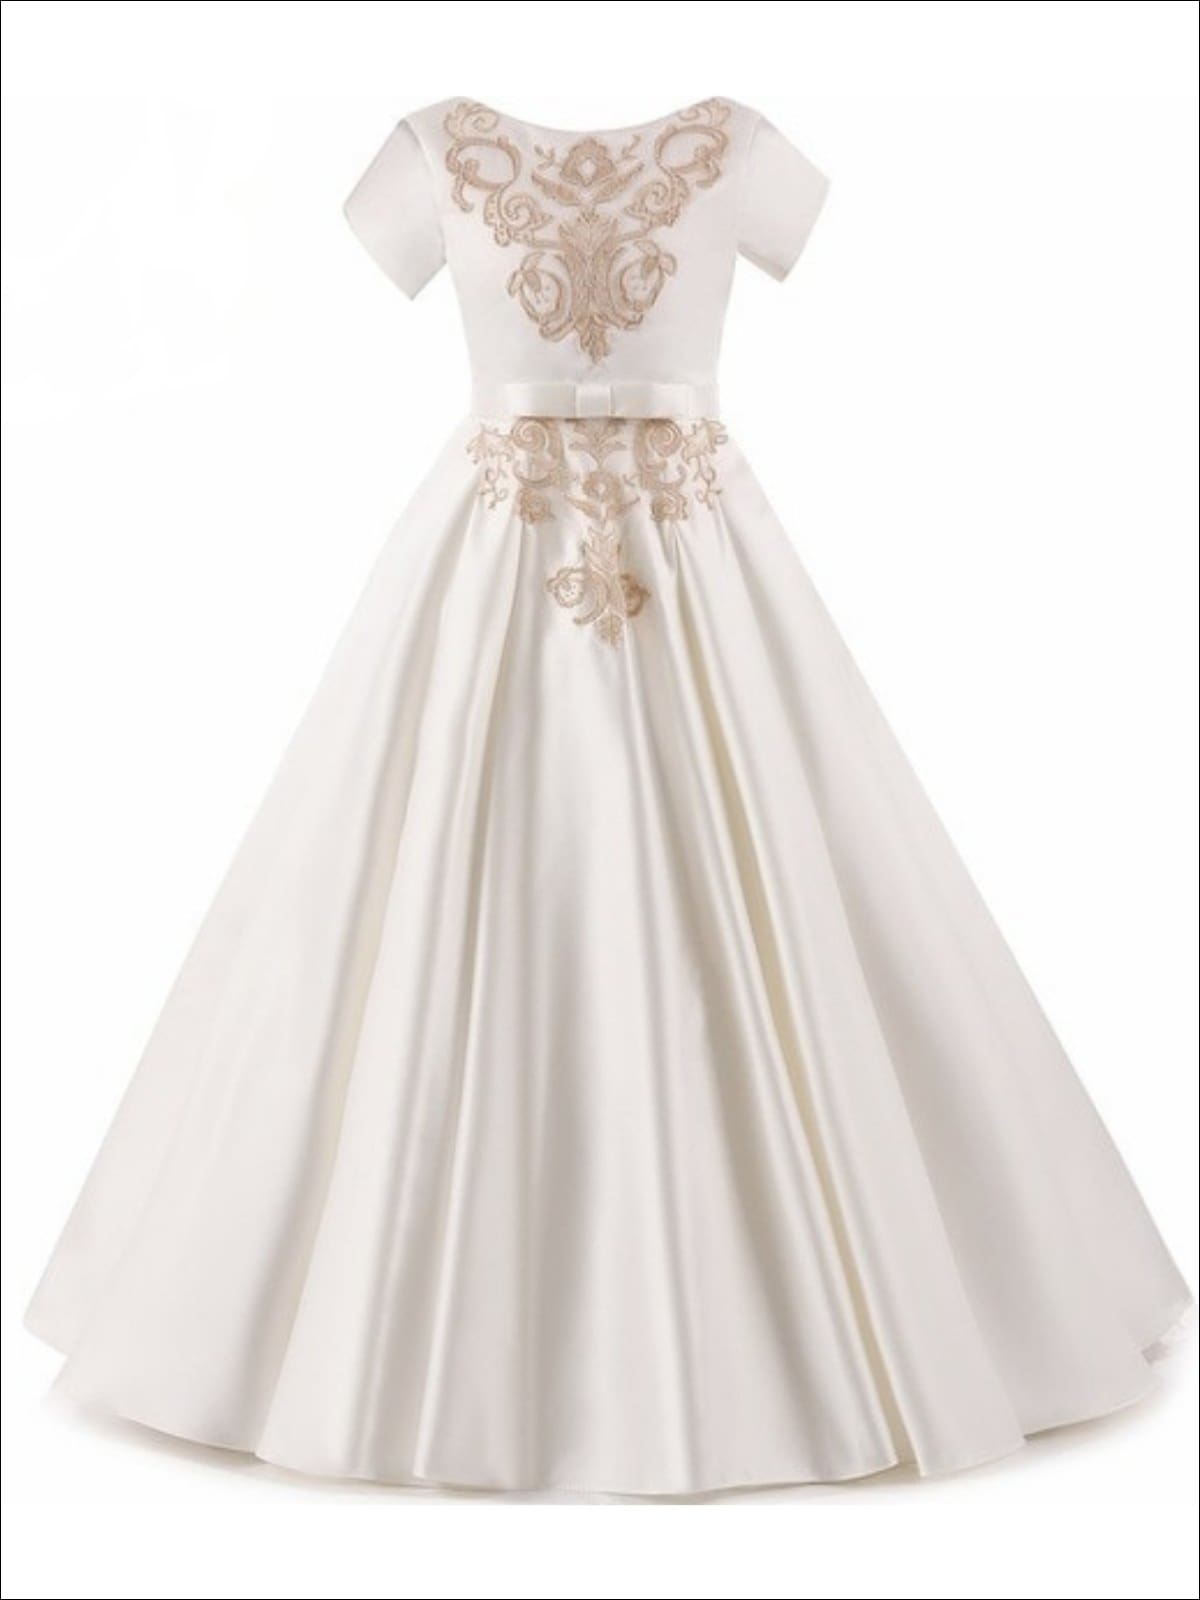 Girls Elegant Gold Embroidered Short Sleeve Flared Floor Length Gown with Bow Tie Belt - Ivory / 3T - Girls Gown